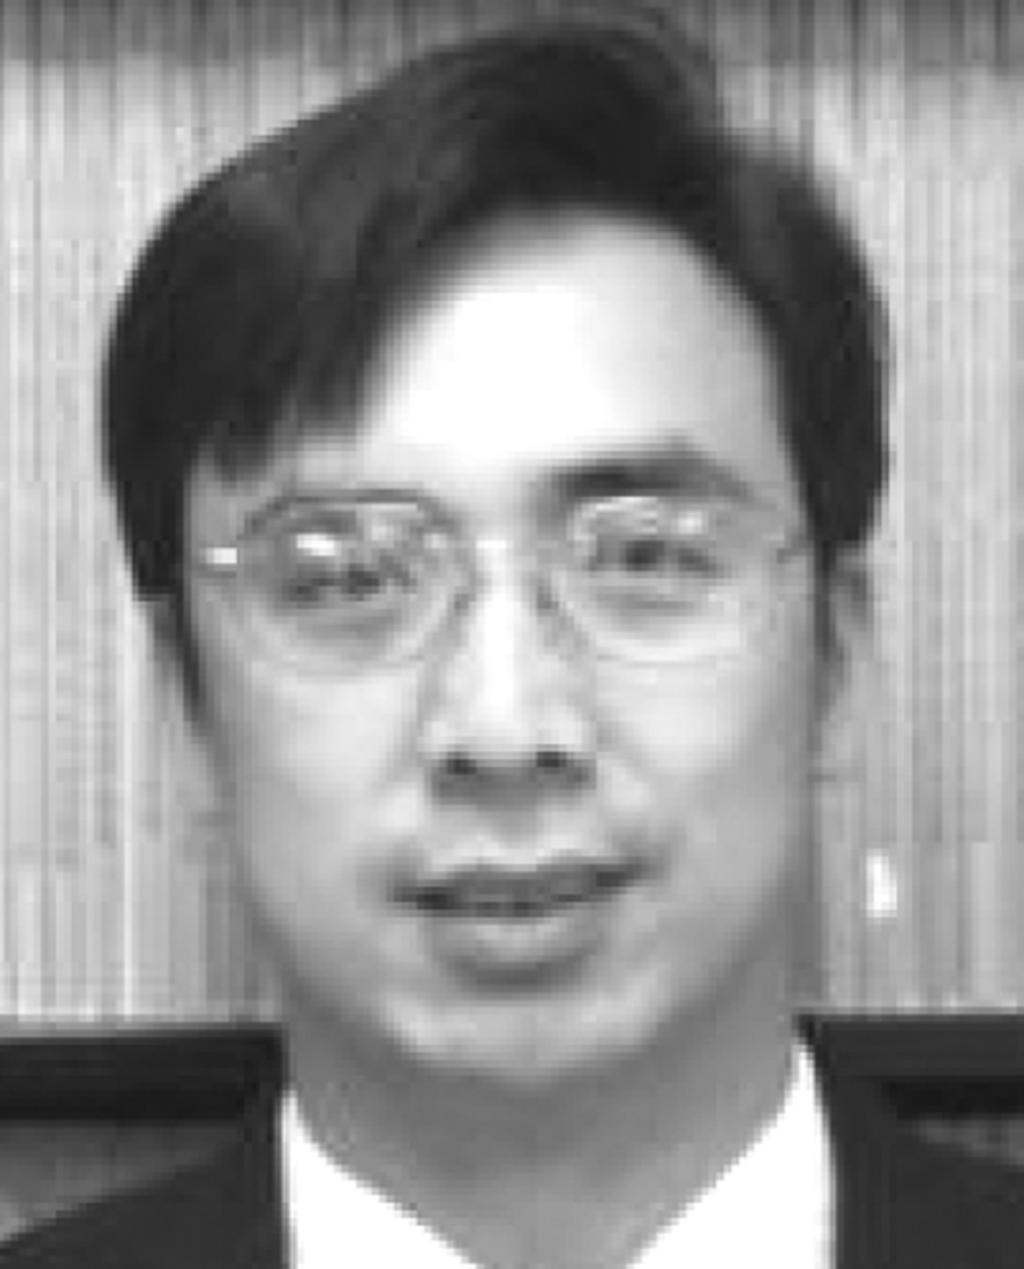 Lei Jiao completed his Ph.D. in Prof. Zhi-Xiang Yu s laboratory at Peking University in 2010 and is currently a postdoctoral fellow in the research group of Prof.